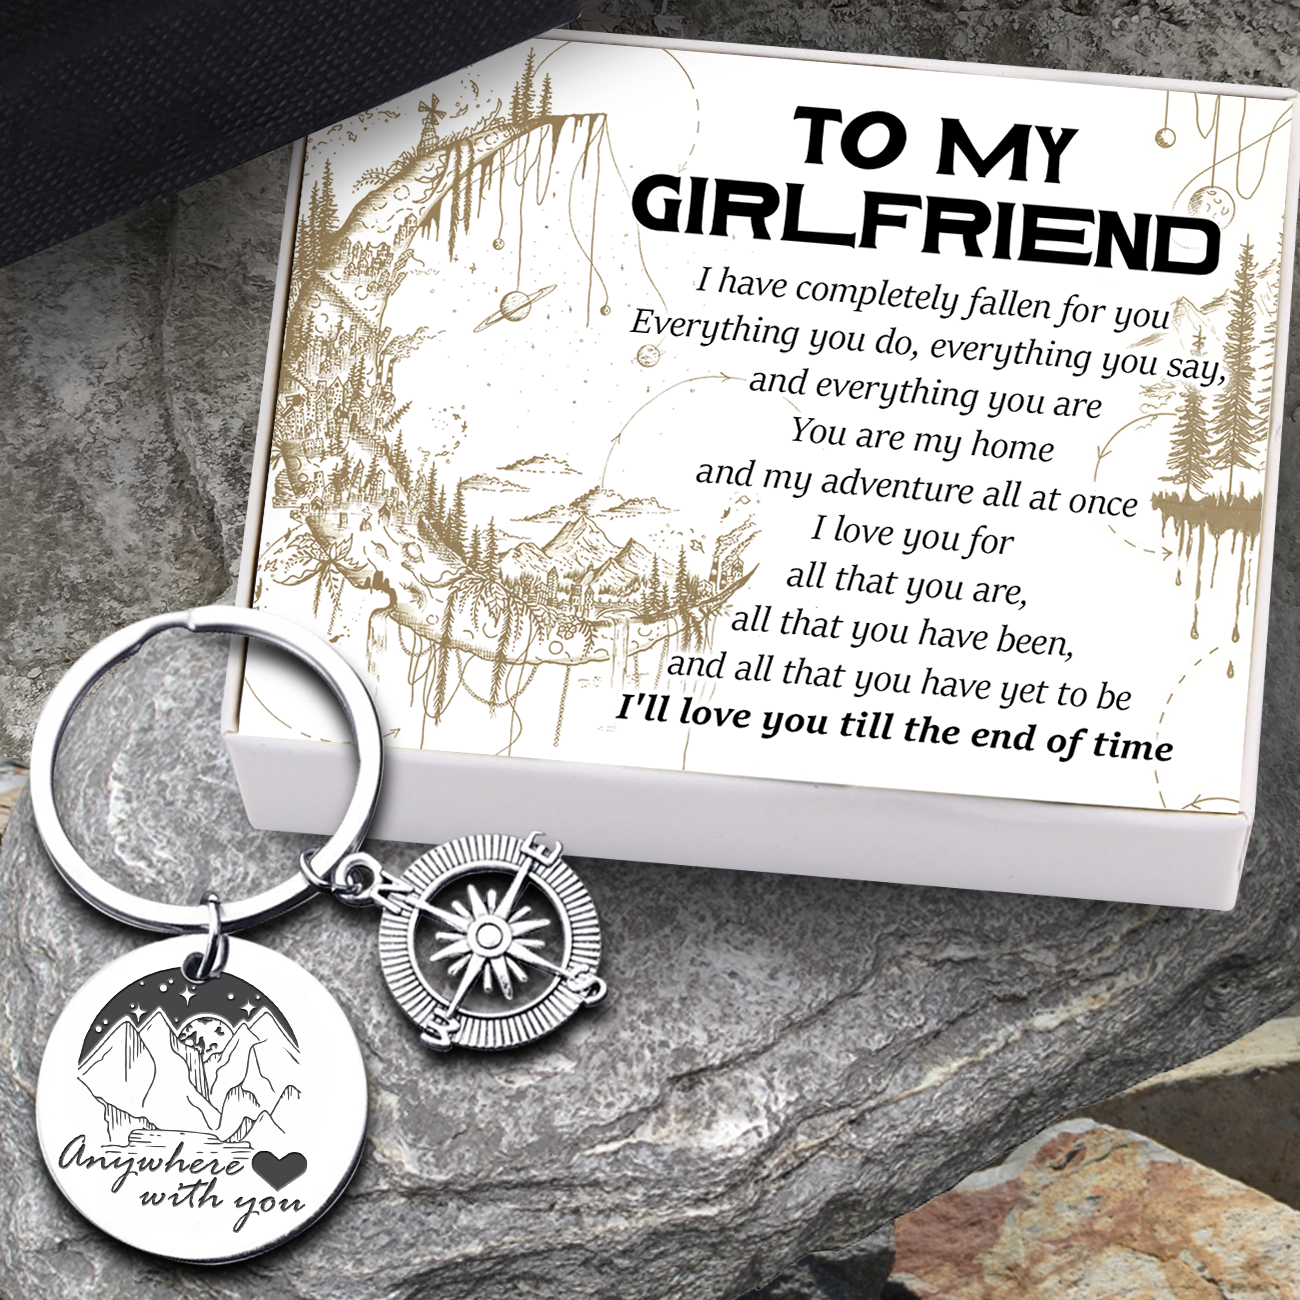 Compass Keychain - Hiking - To My Girlfriend - I Love You For All That You Are - Ukgkw13004